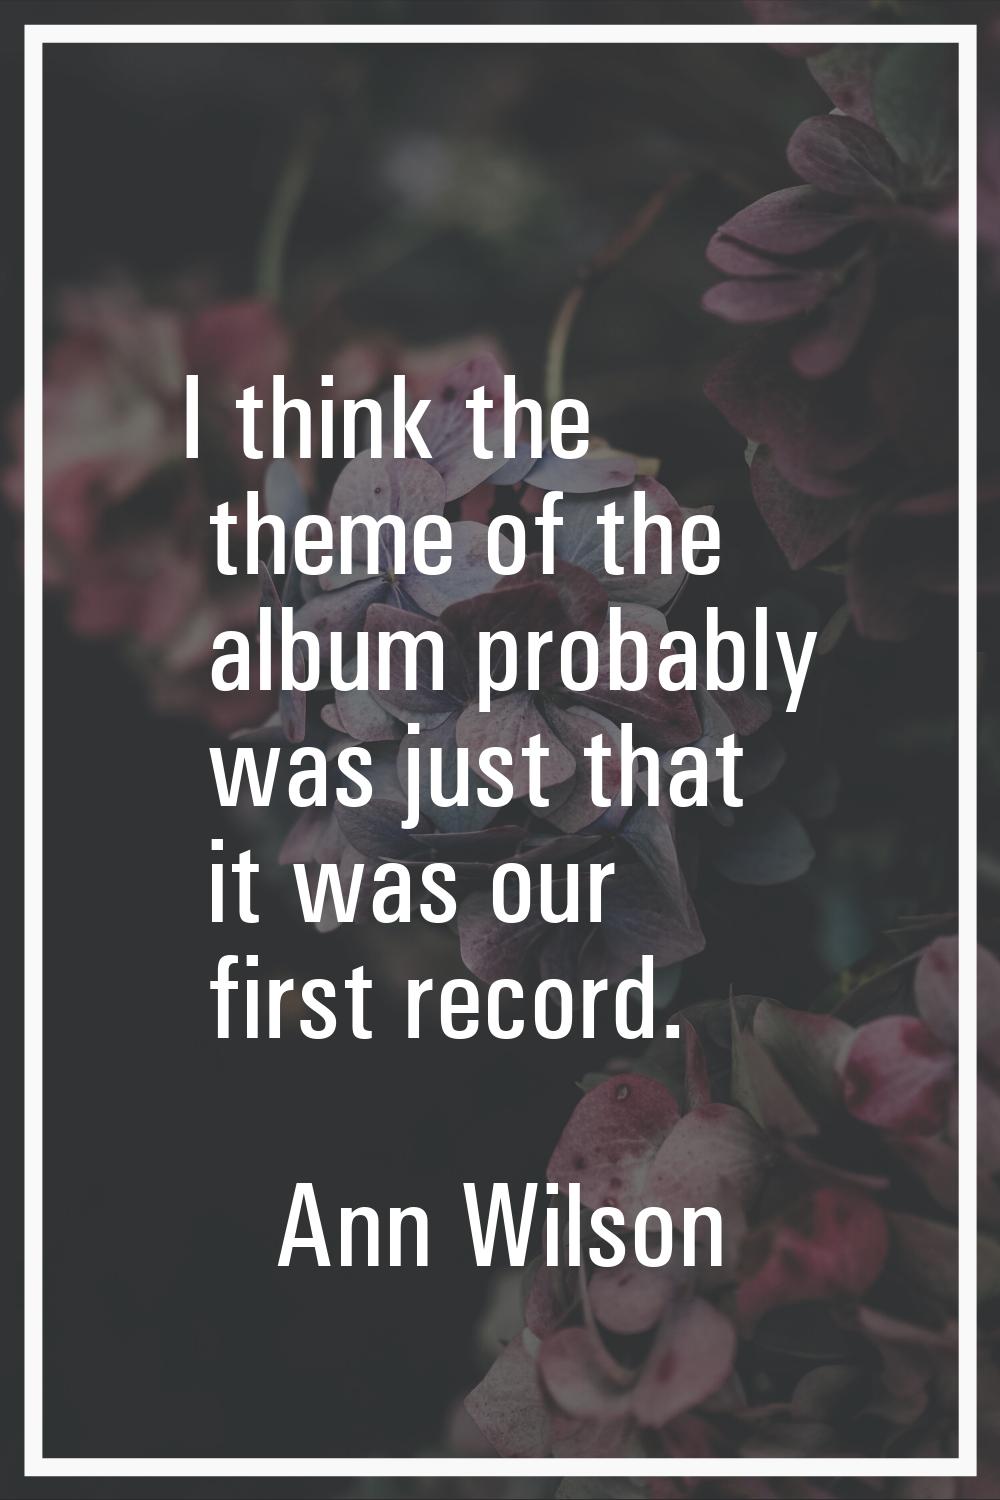 I think the theme of the album probably was just that it was our first record.